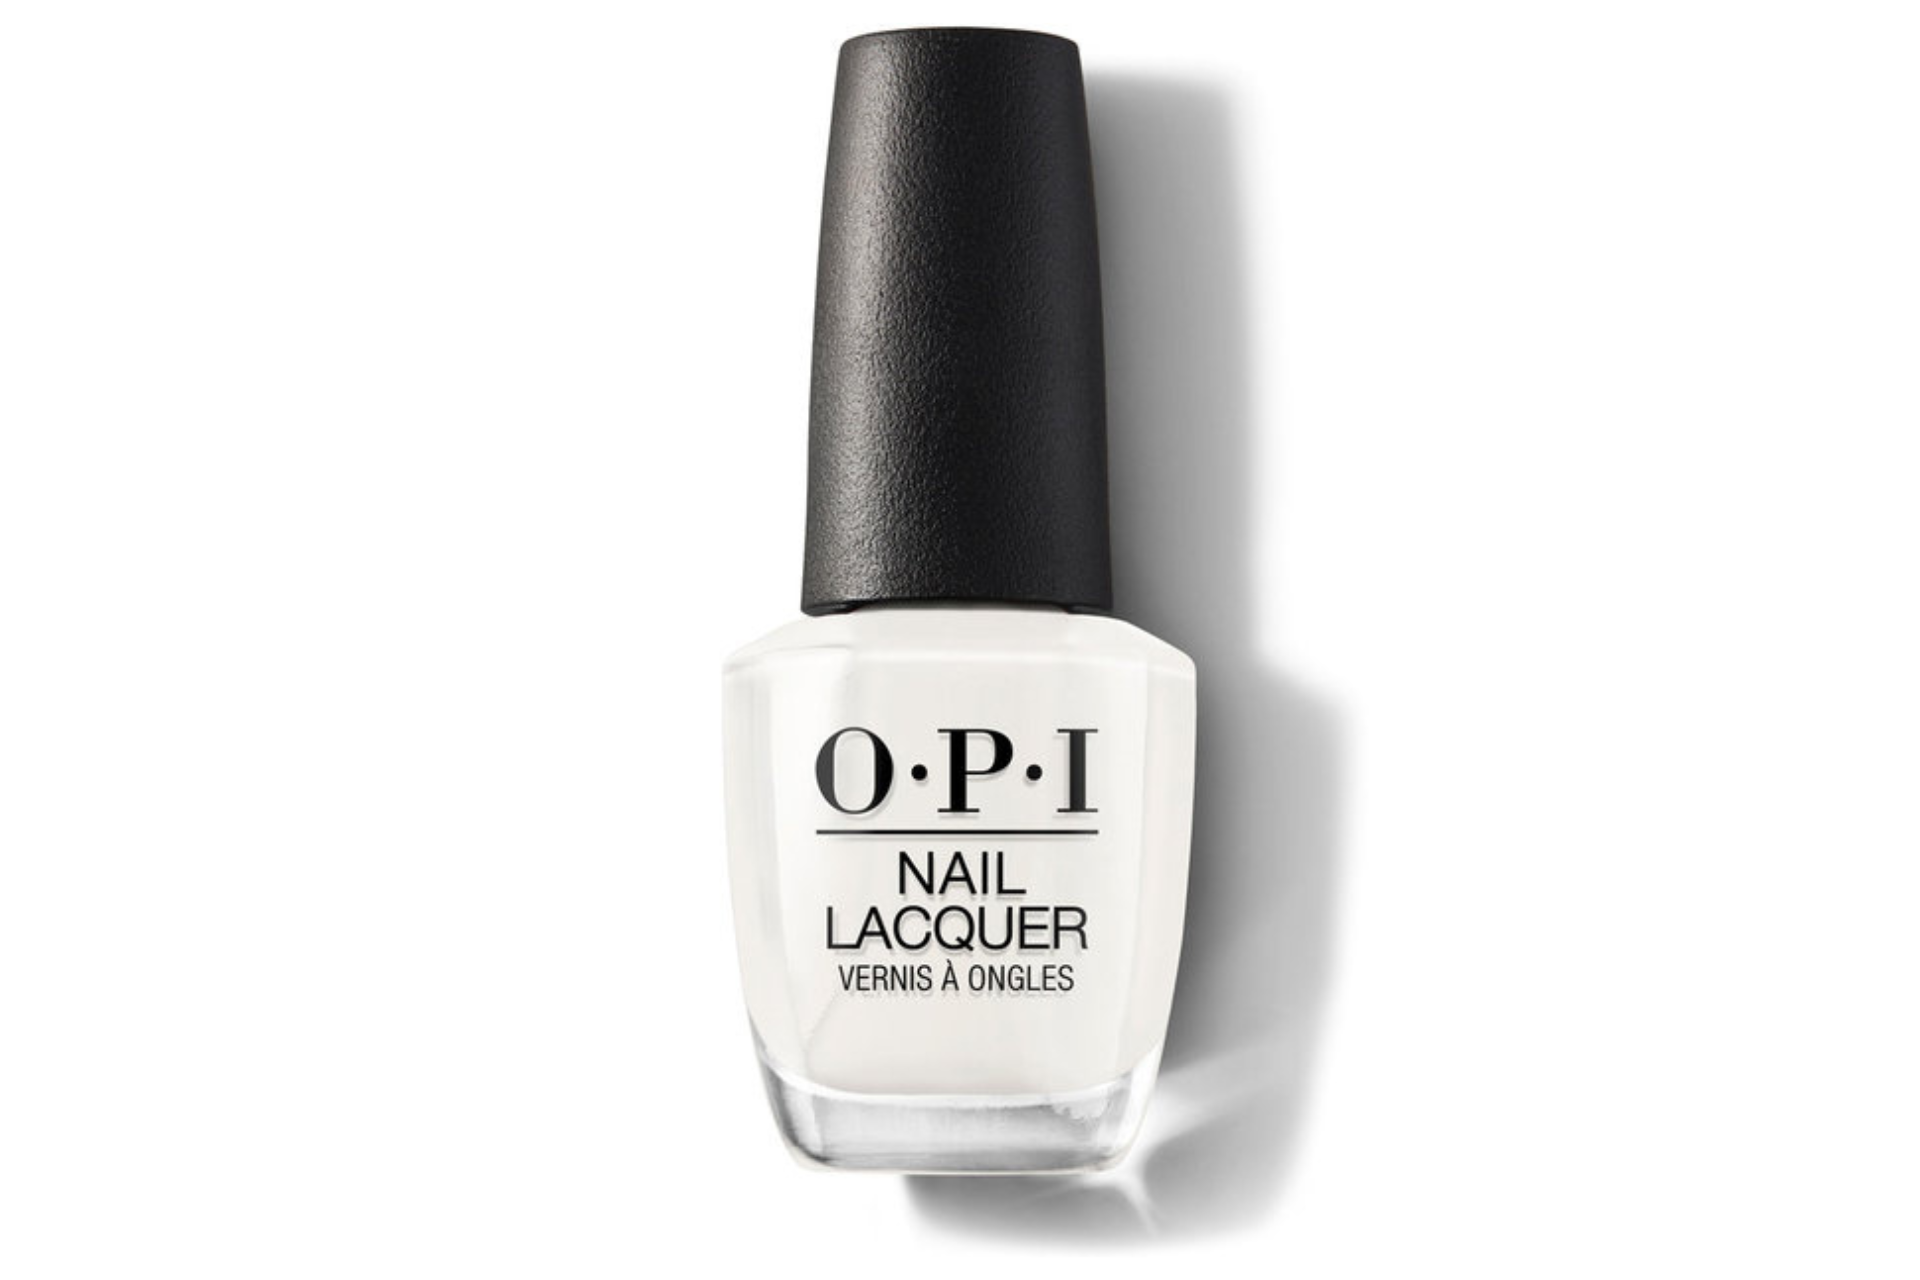 5. OPI Nail Lacquer in "Funny Bunny" - wide 6